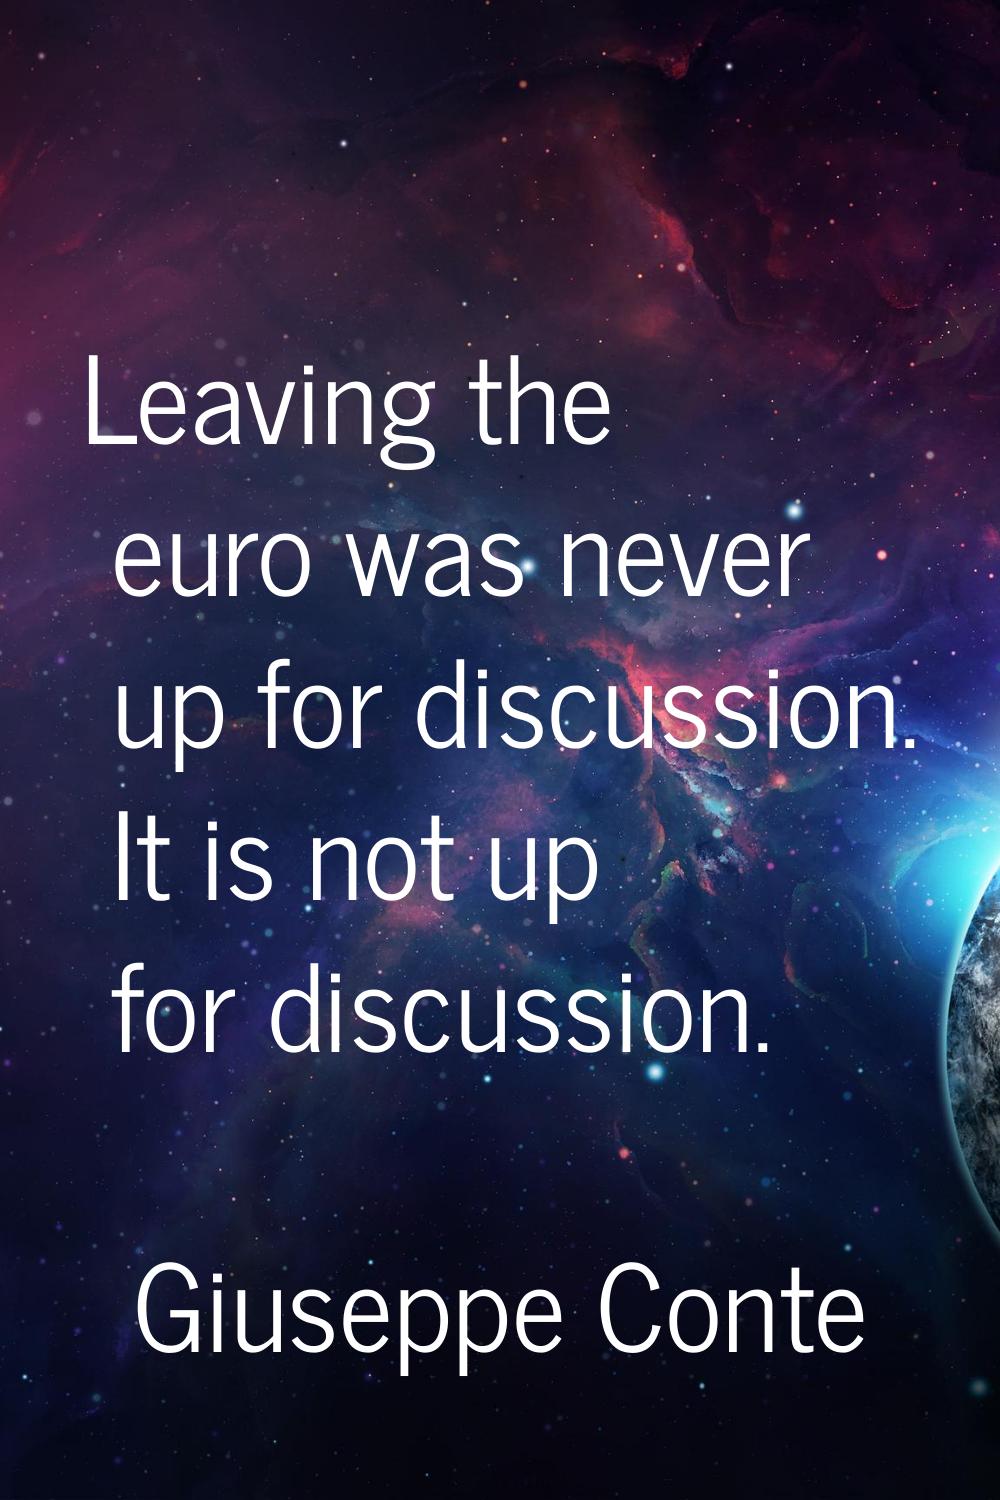 Leaving the euro was never up for discussion. It is not up for discussion.